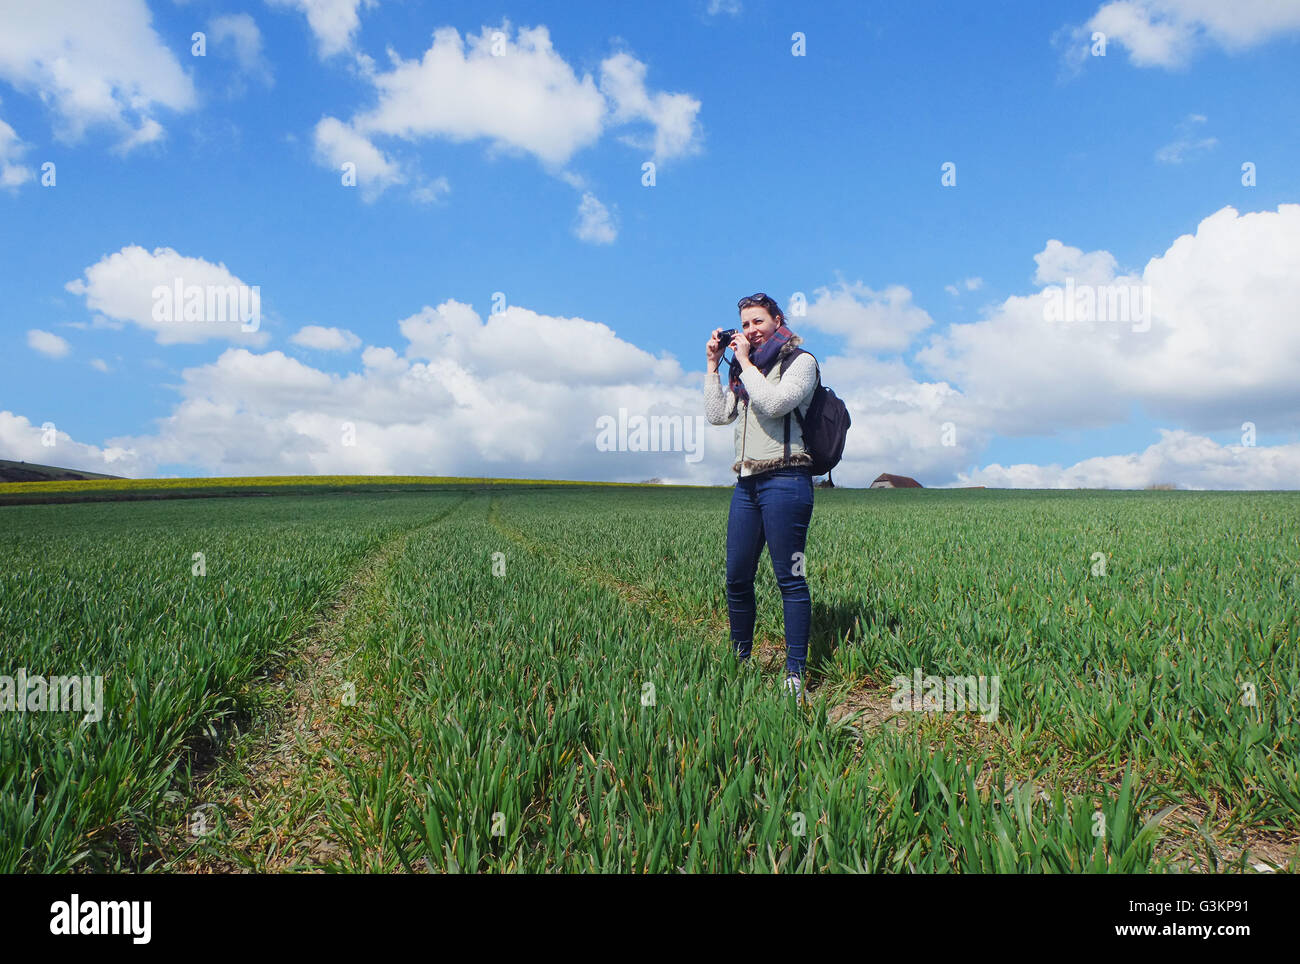 Young woman standing in field, taking photograph of landscape Stock Photo